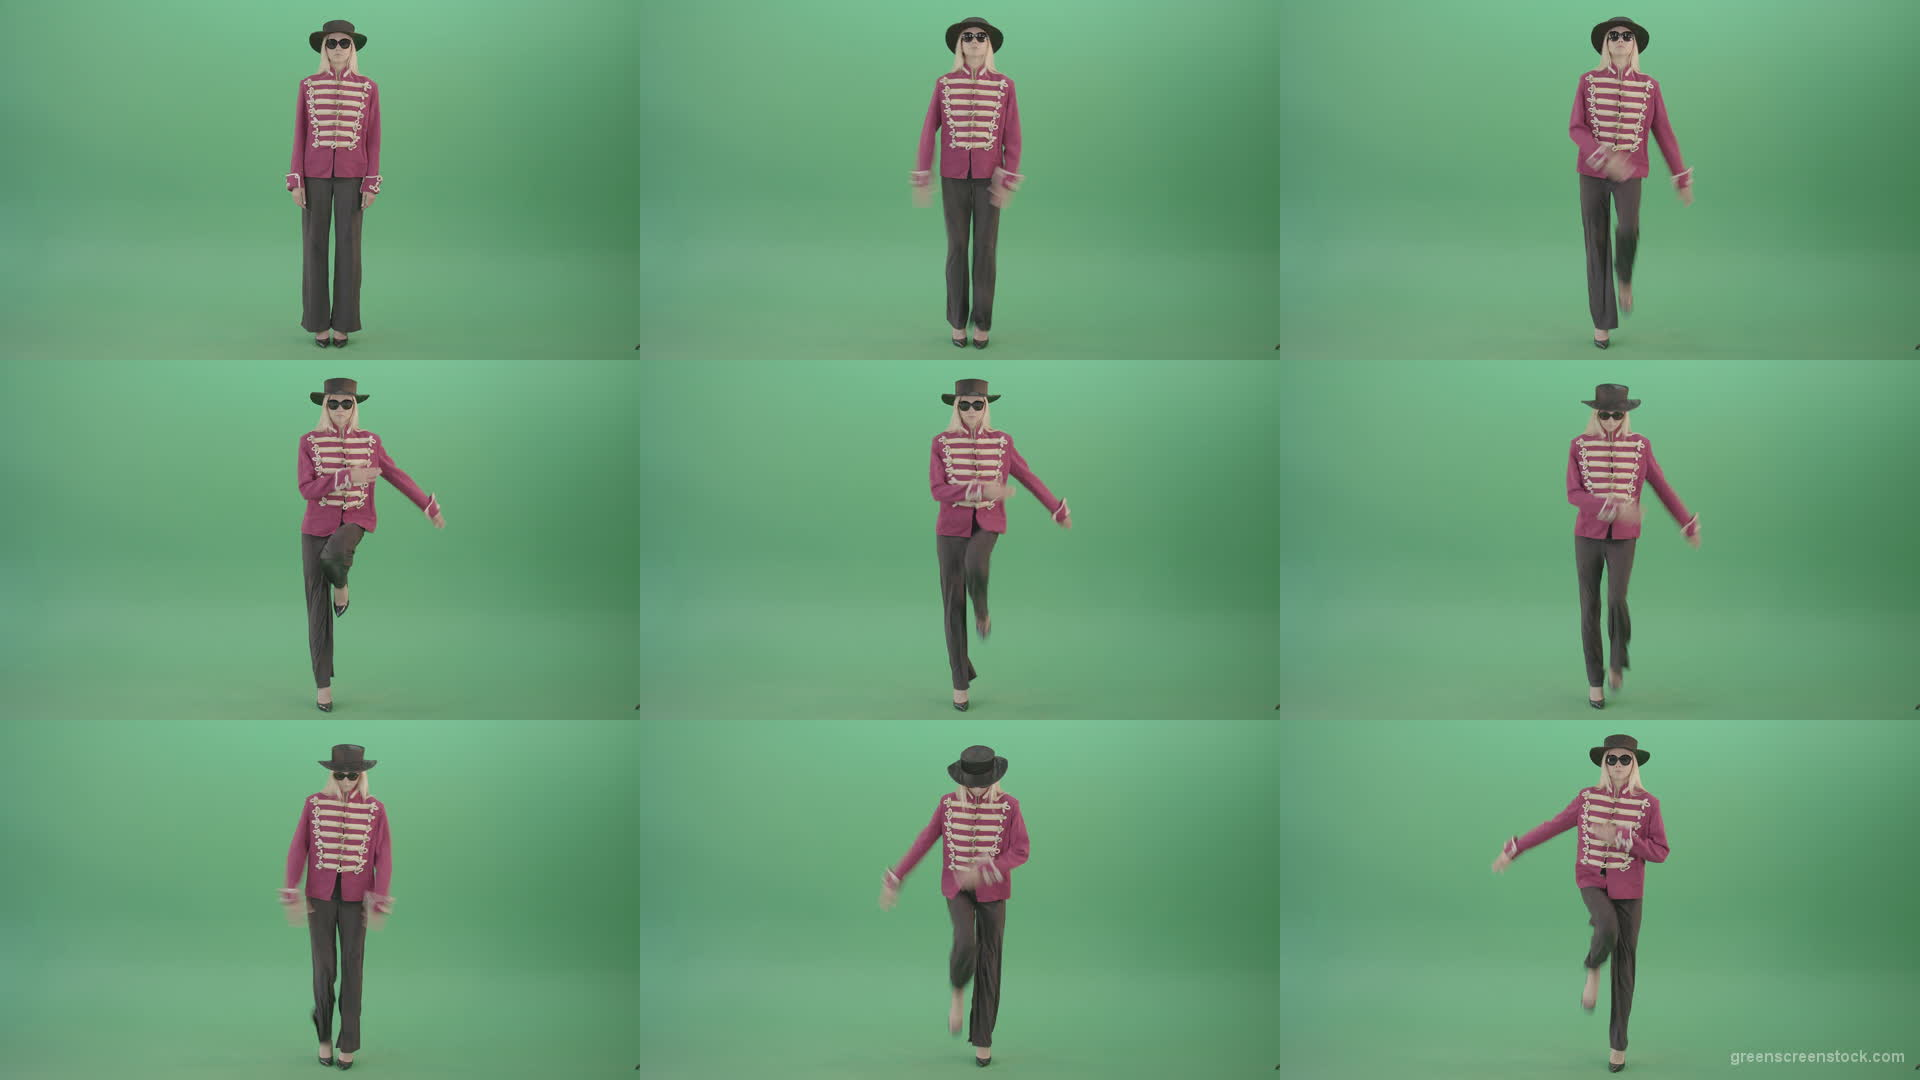 Girl-in-black-hat-and-red-uniform-marching-in-front-view-on-green-screen-4K-Video-footage-1920 Green Screen Stock